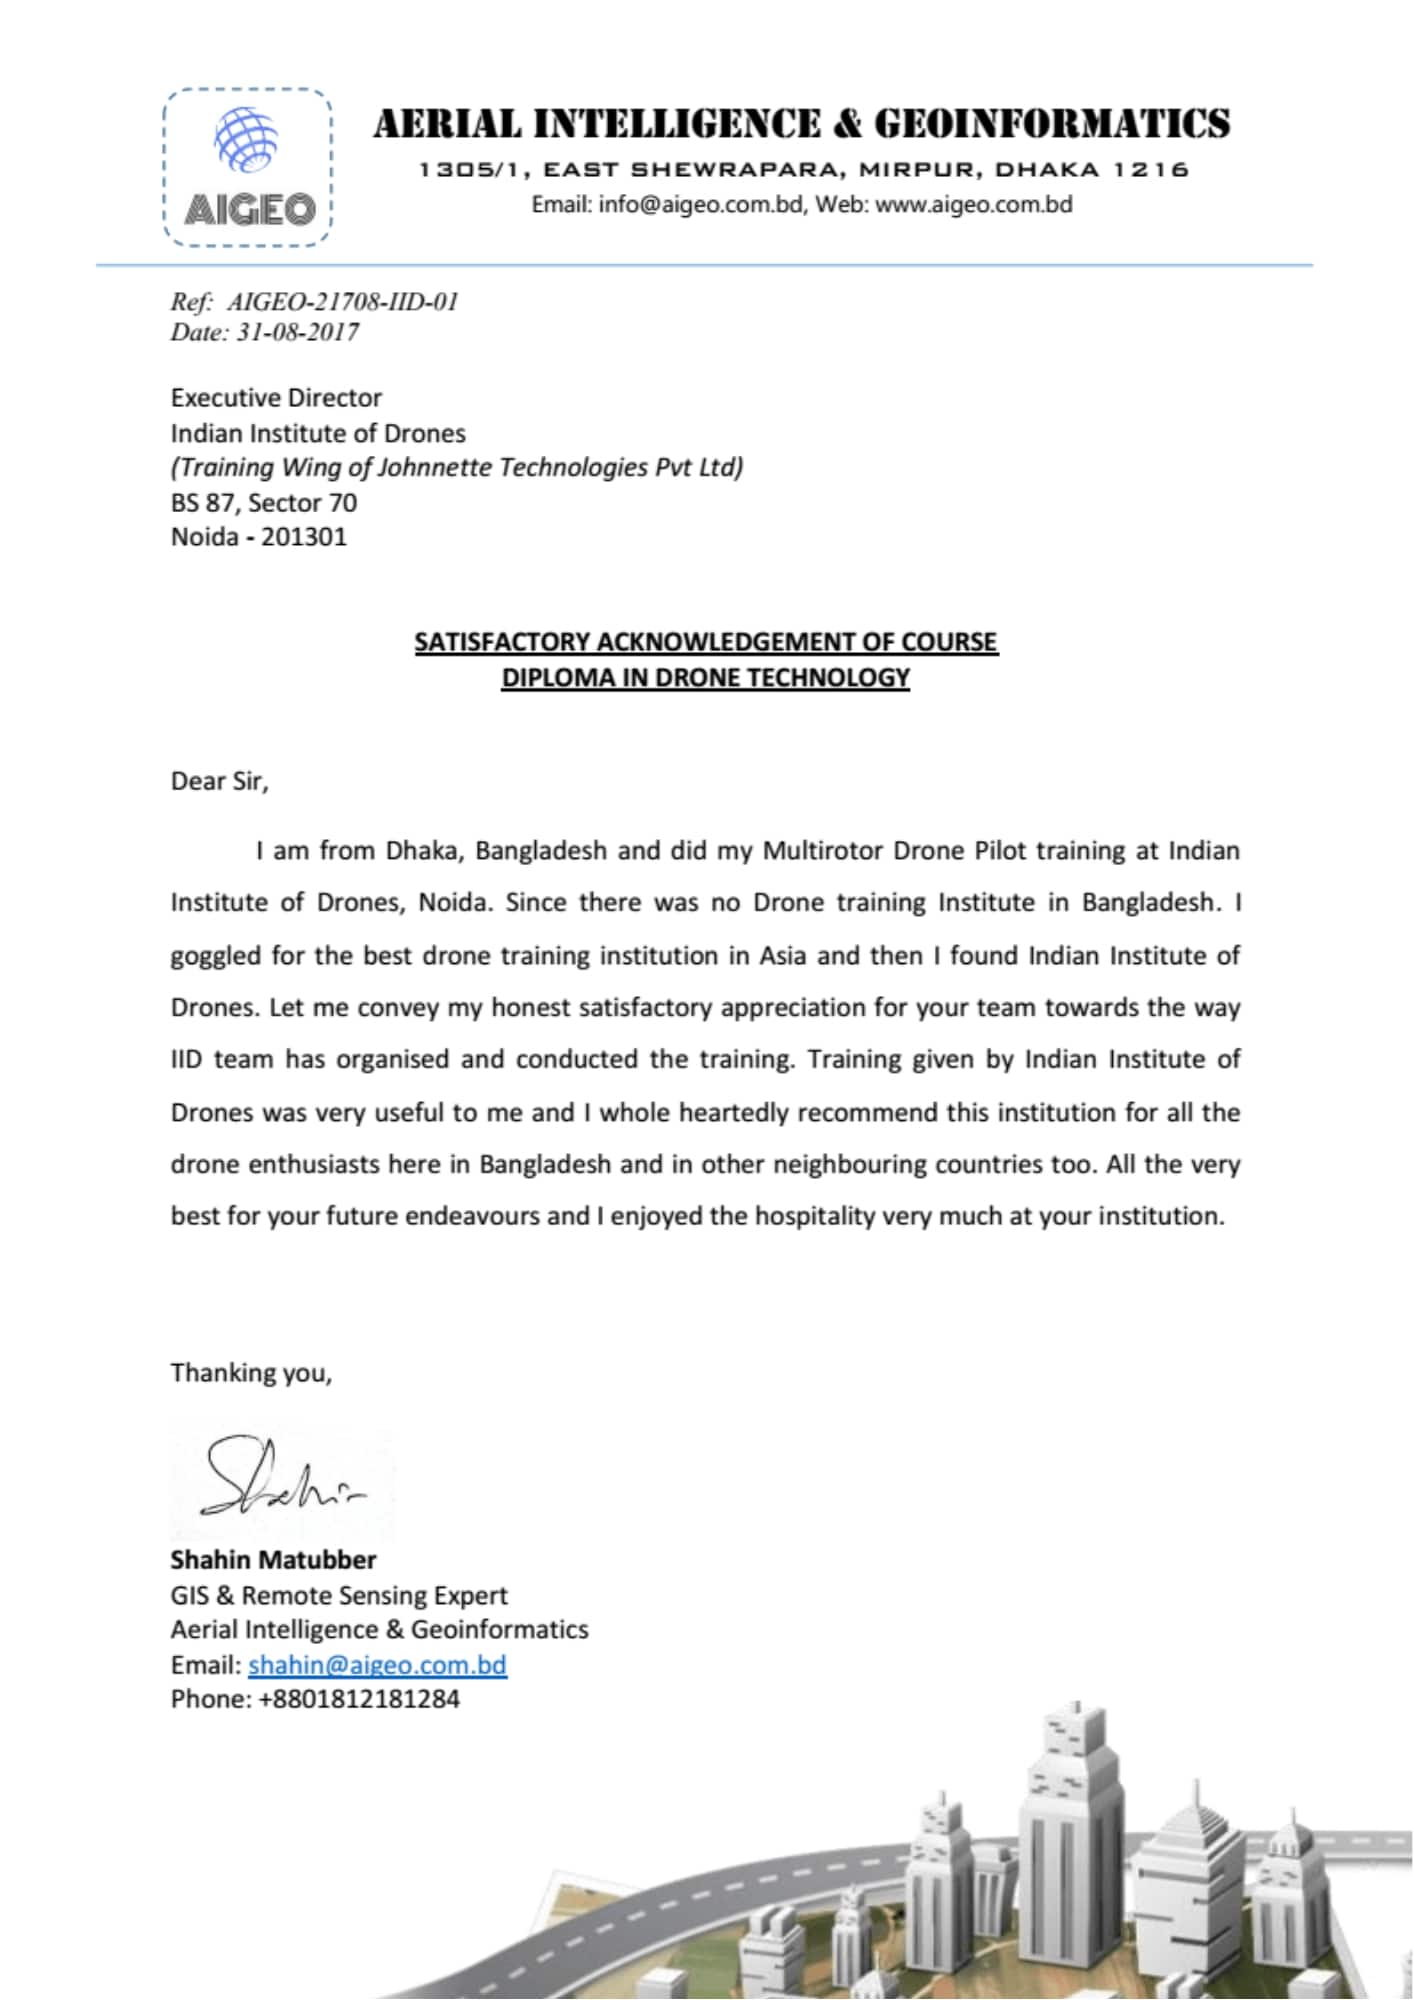 Satisfactory Letter for Drone Training Received from AIGEO, Bangladesh